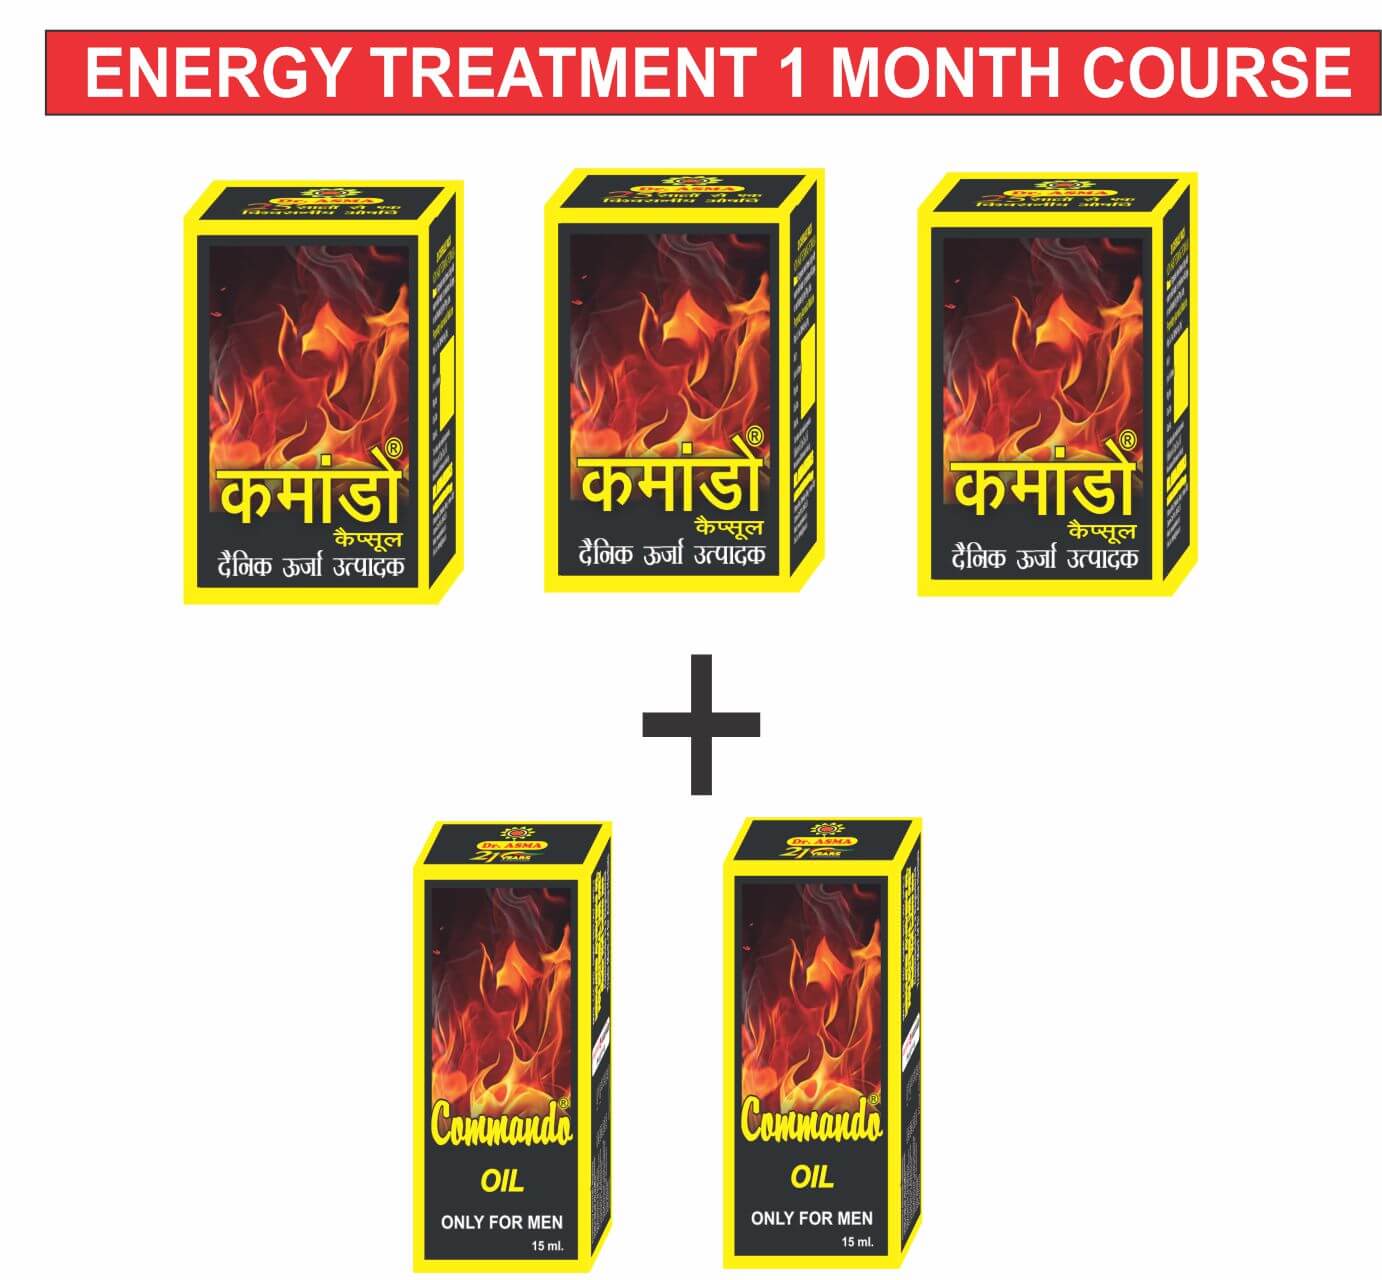 commando capsule pack of 5 capsules and oils for long time, sex time increase ayurvedic medicine